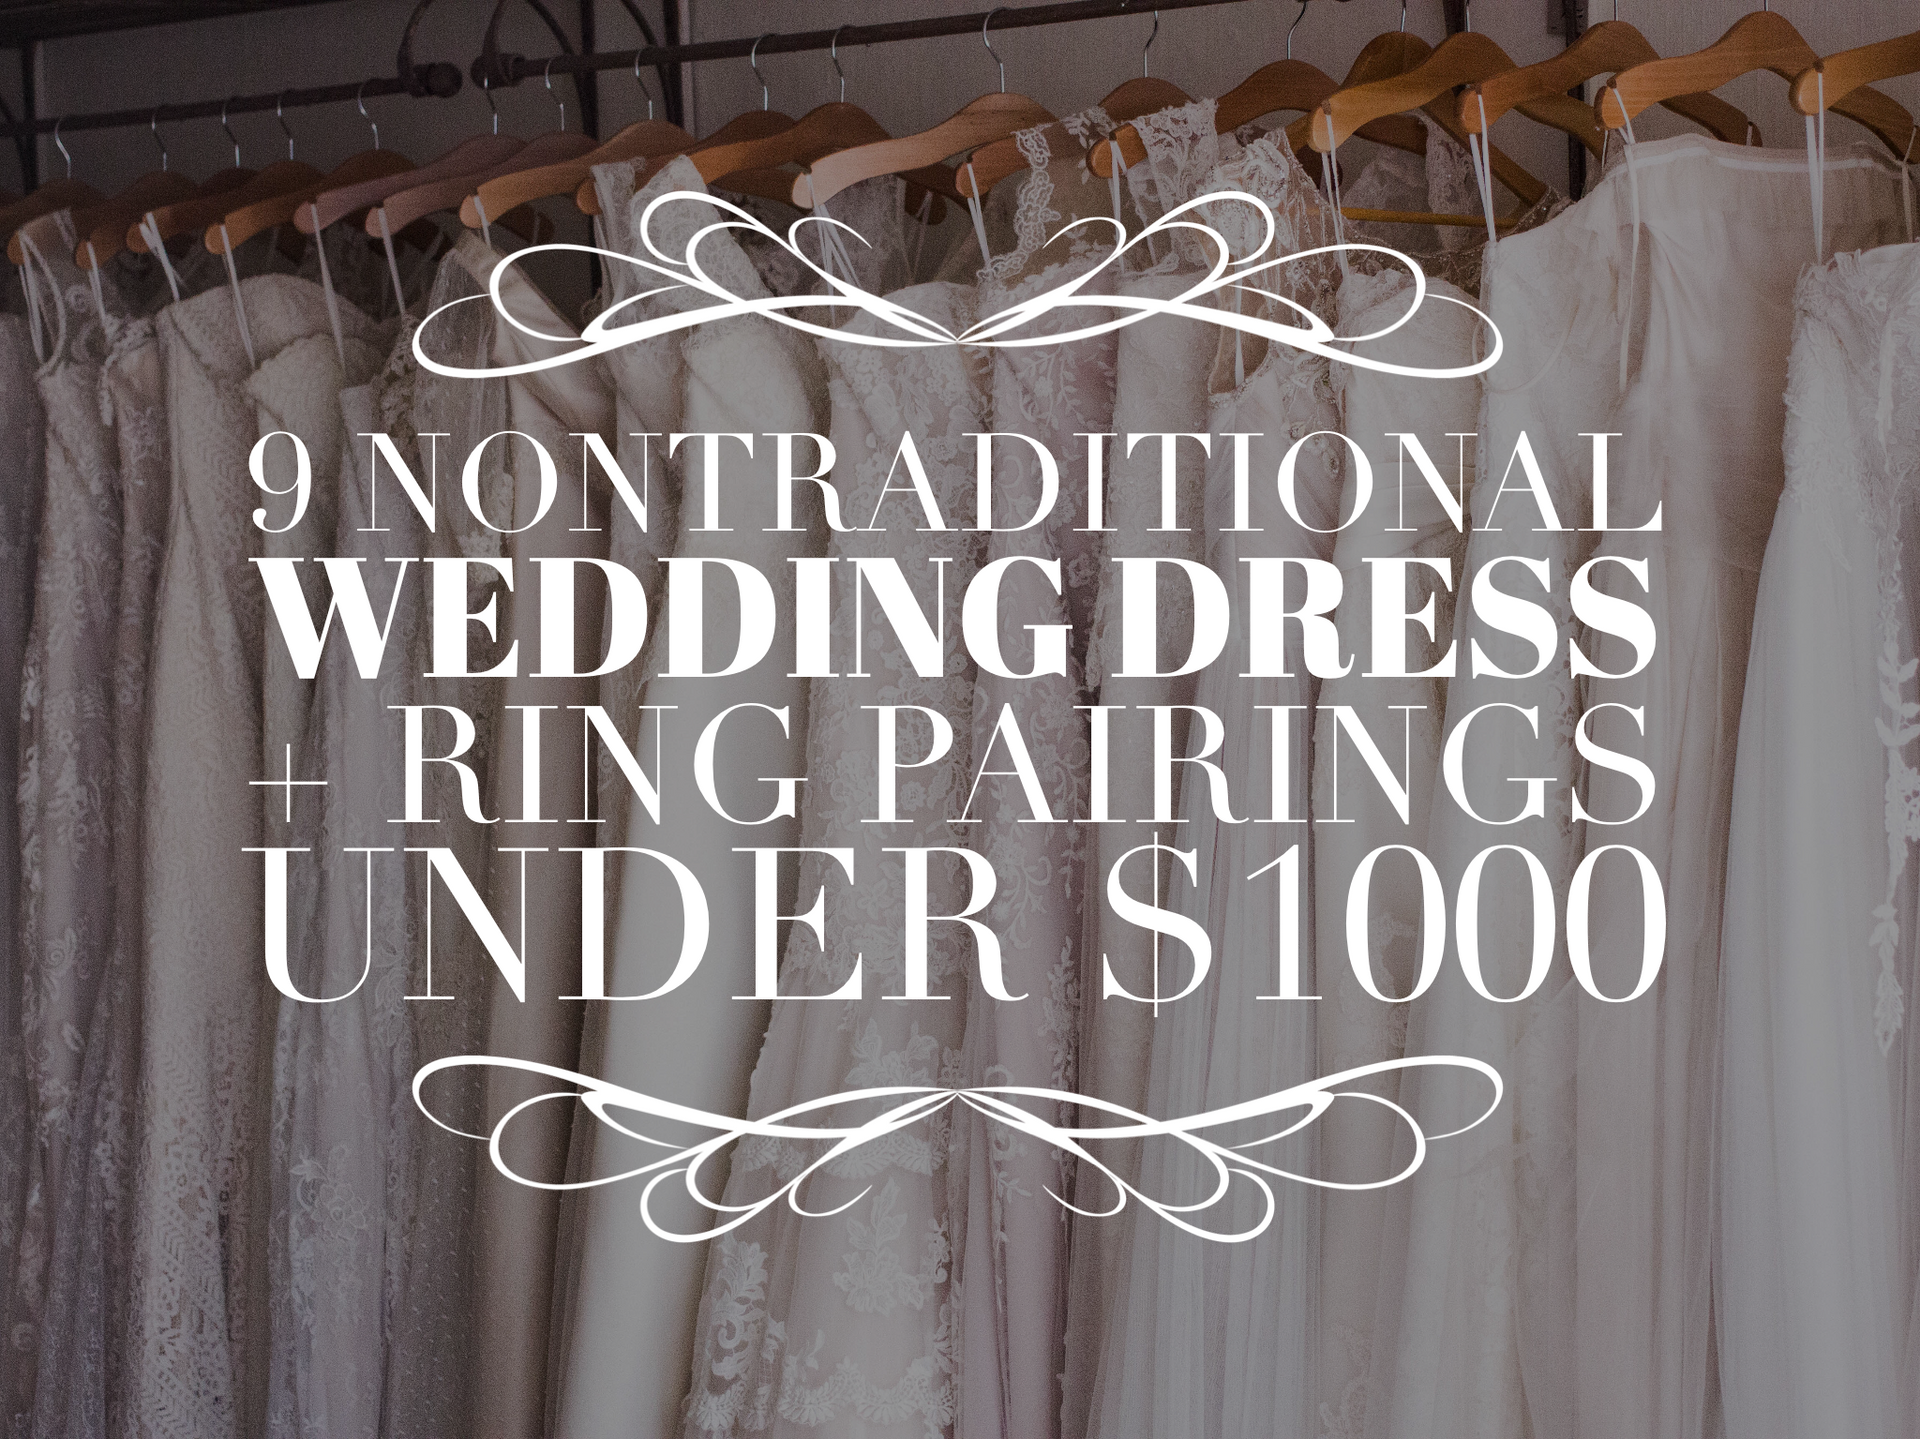 9 Nontraditional Wedding Dress + Ring Pairings Under $1000